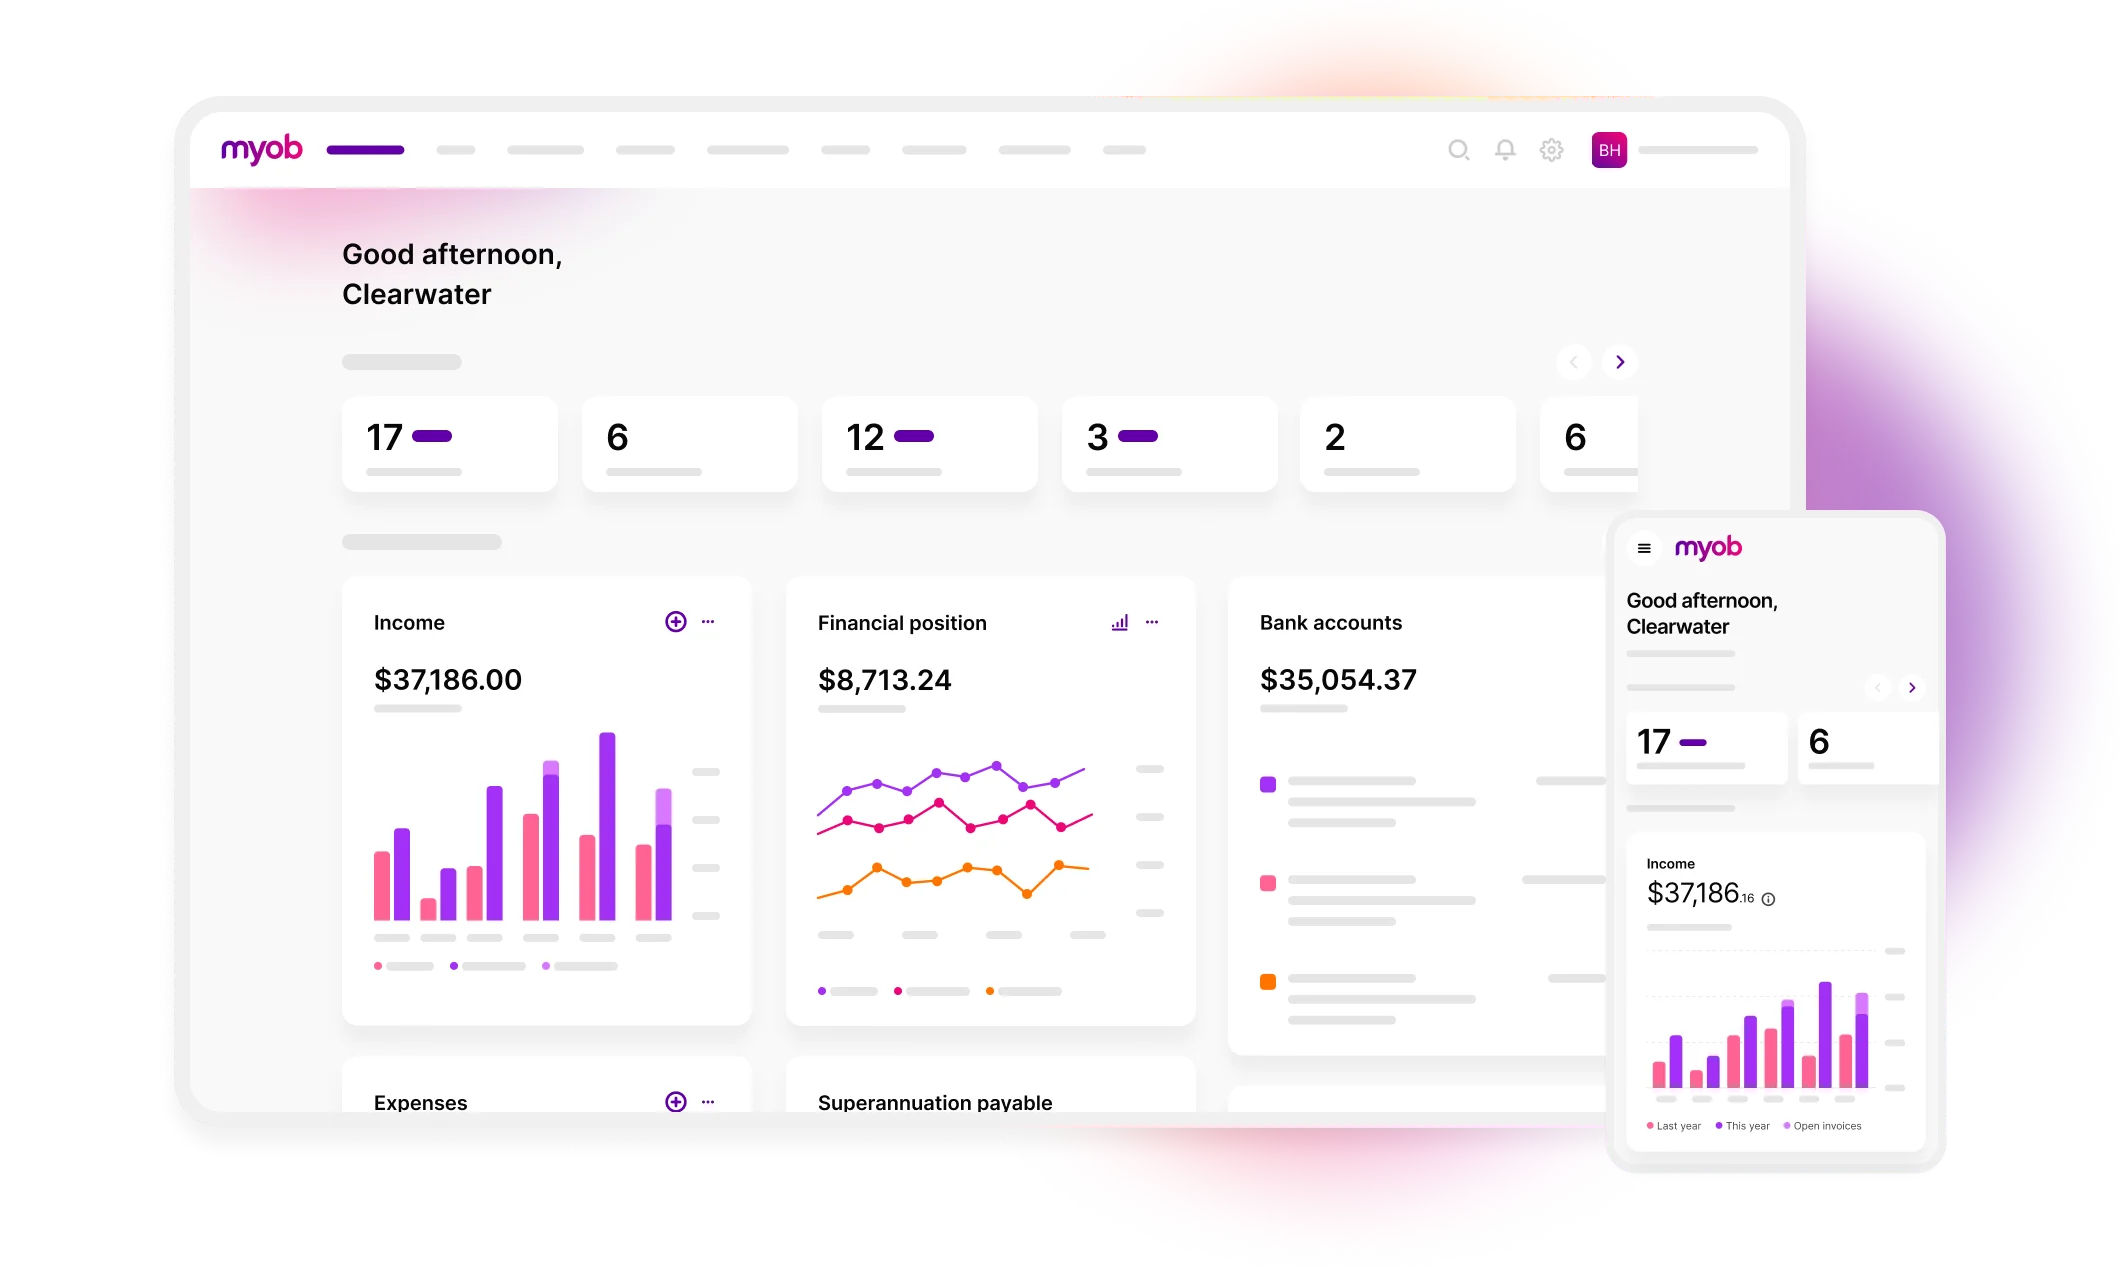 The MYOB Business dashboard includes helpful information at a glance. This includes income charts, financial position graphs and details on your business bank accounts. All of this information is avaliable on desktop and mobile.